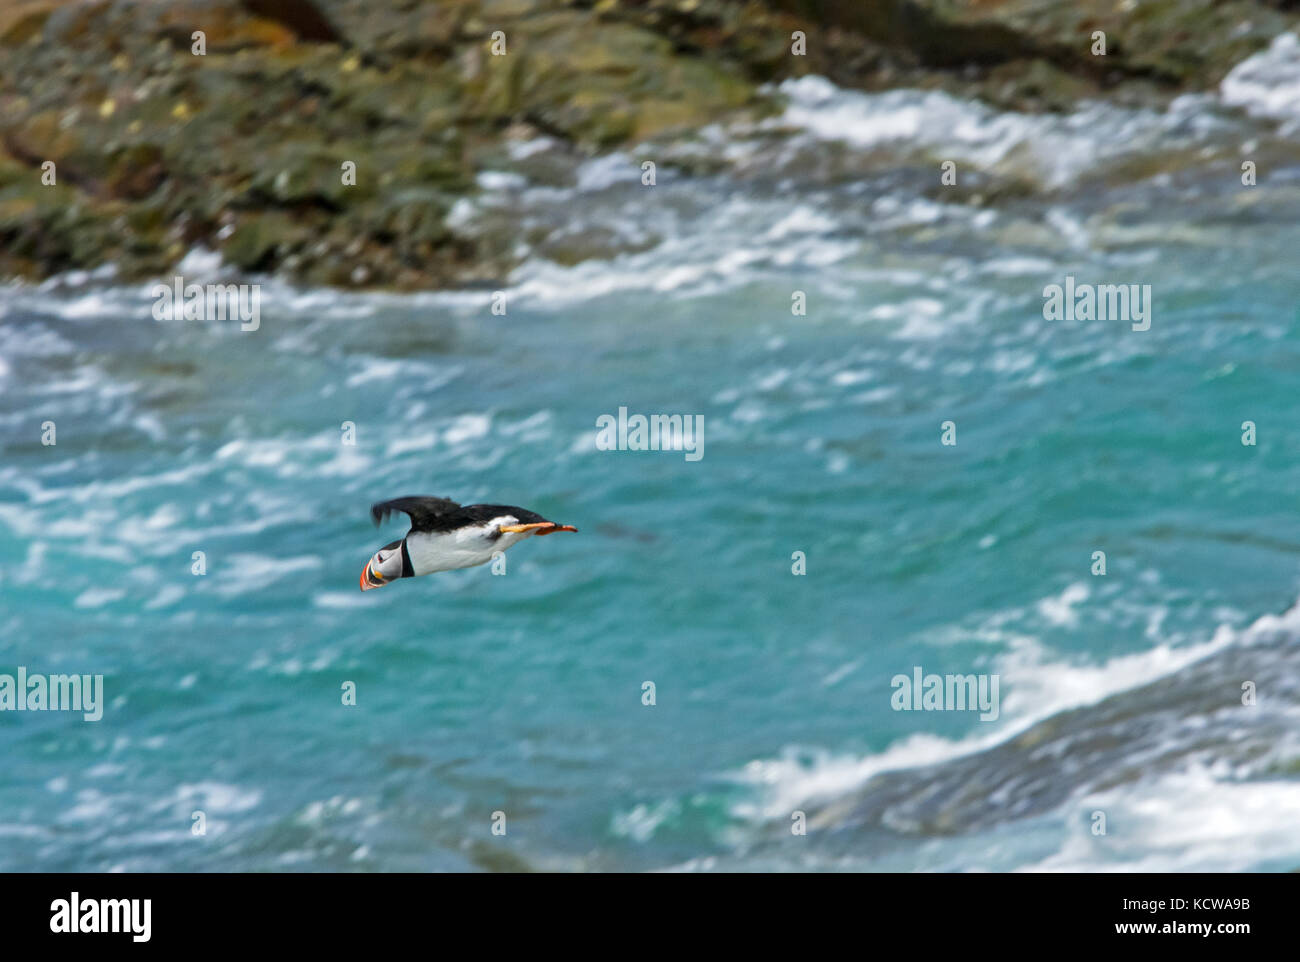 Atlantic puffin (Fratercula arctica) in flight on the north Atlantic ocean. It is the official bird of Newfoundland and Labrador since 1992., Elliston, Newfoundland & Labrador, Canada Stock Photo